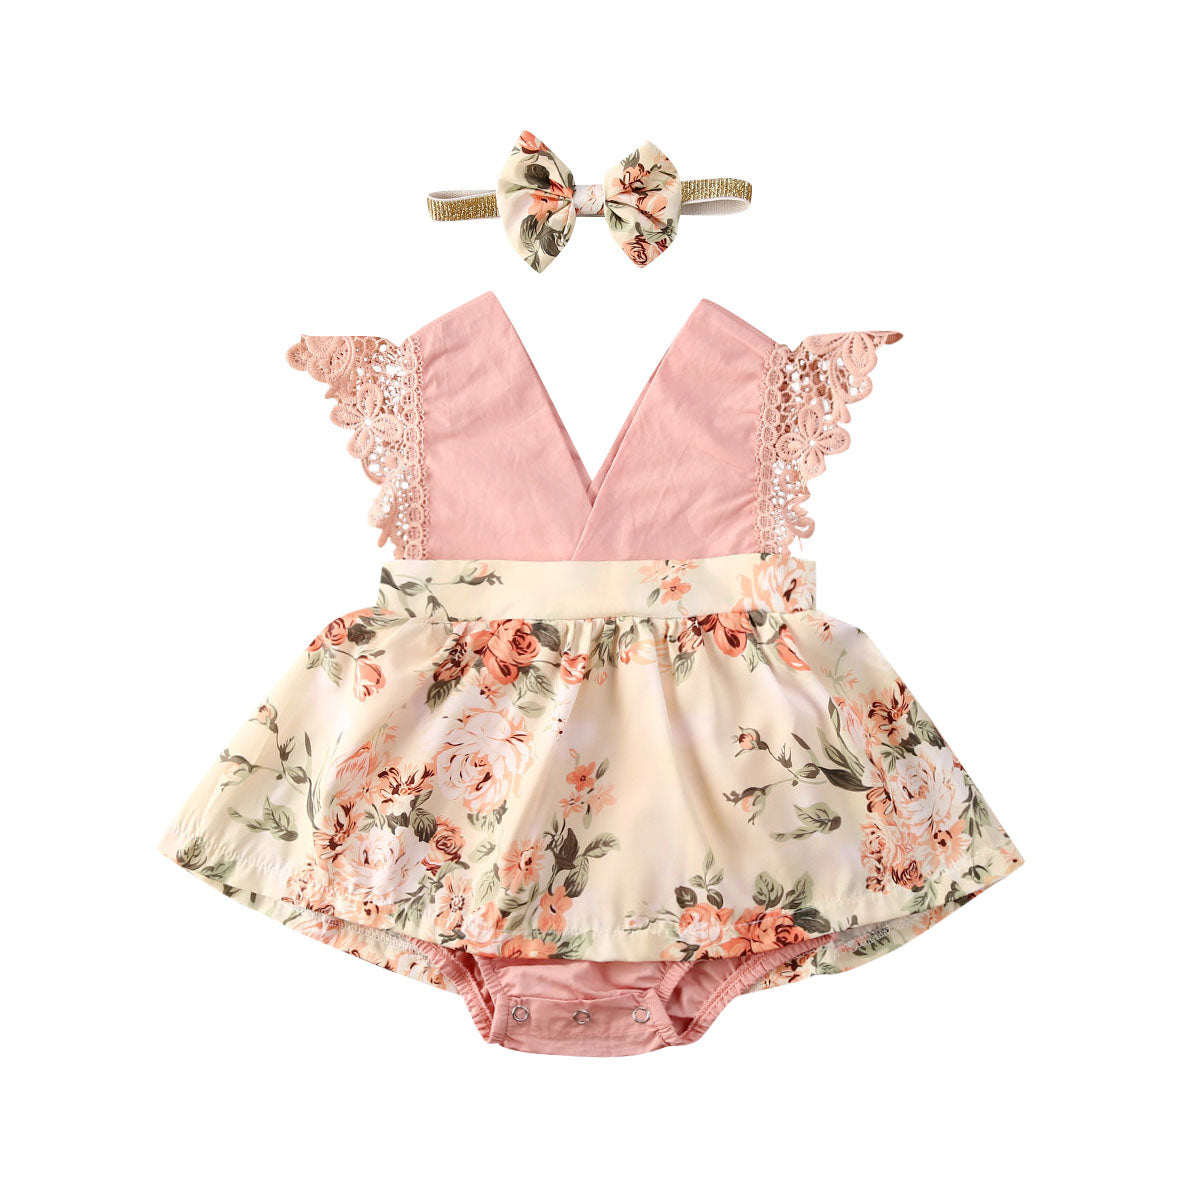 Baby One-piece Romper Sleeveless Lace Small Floral